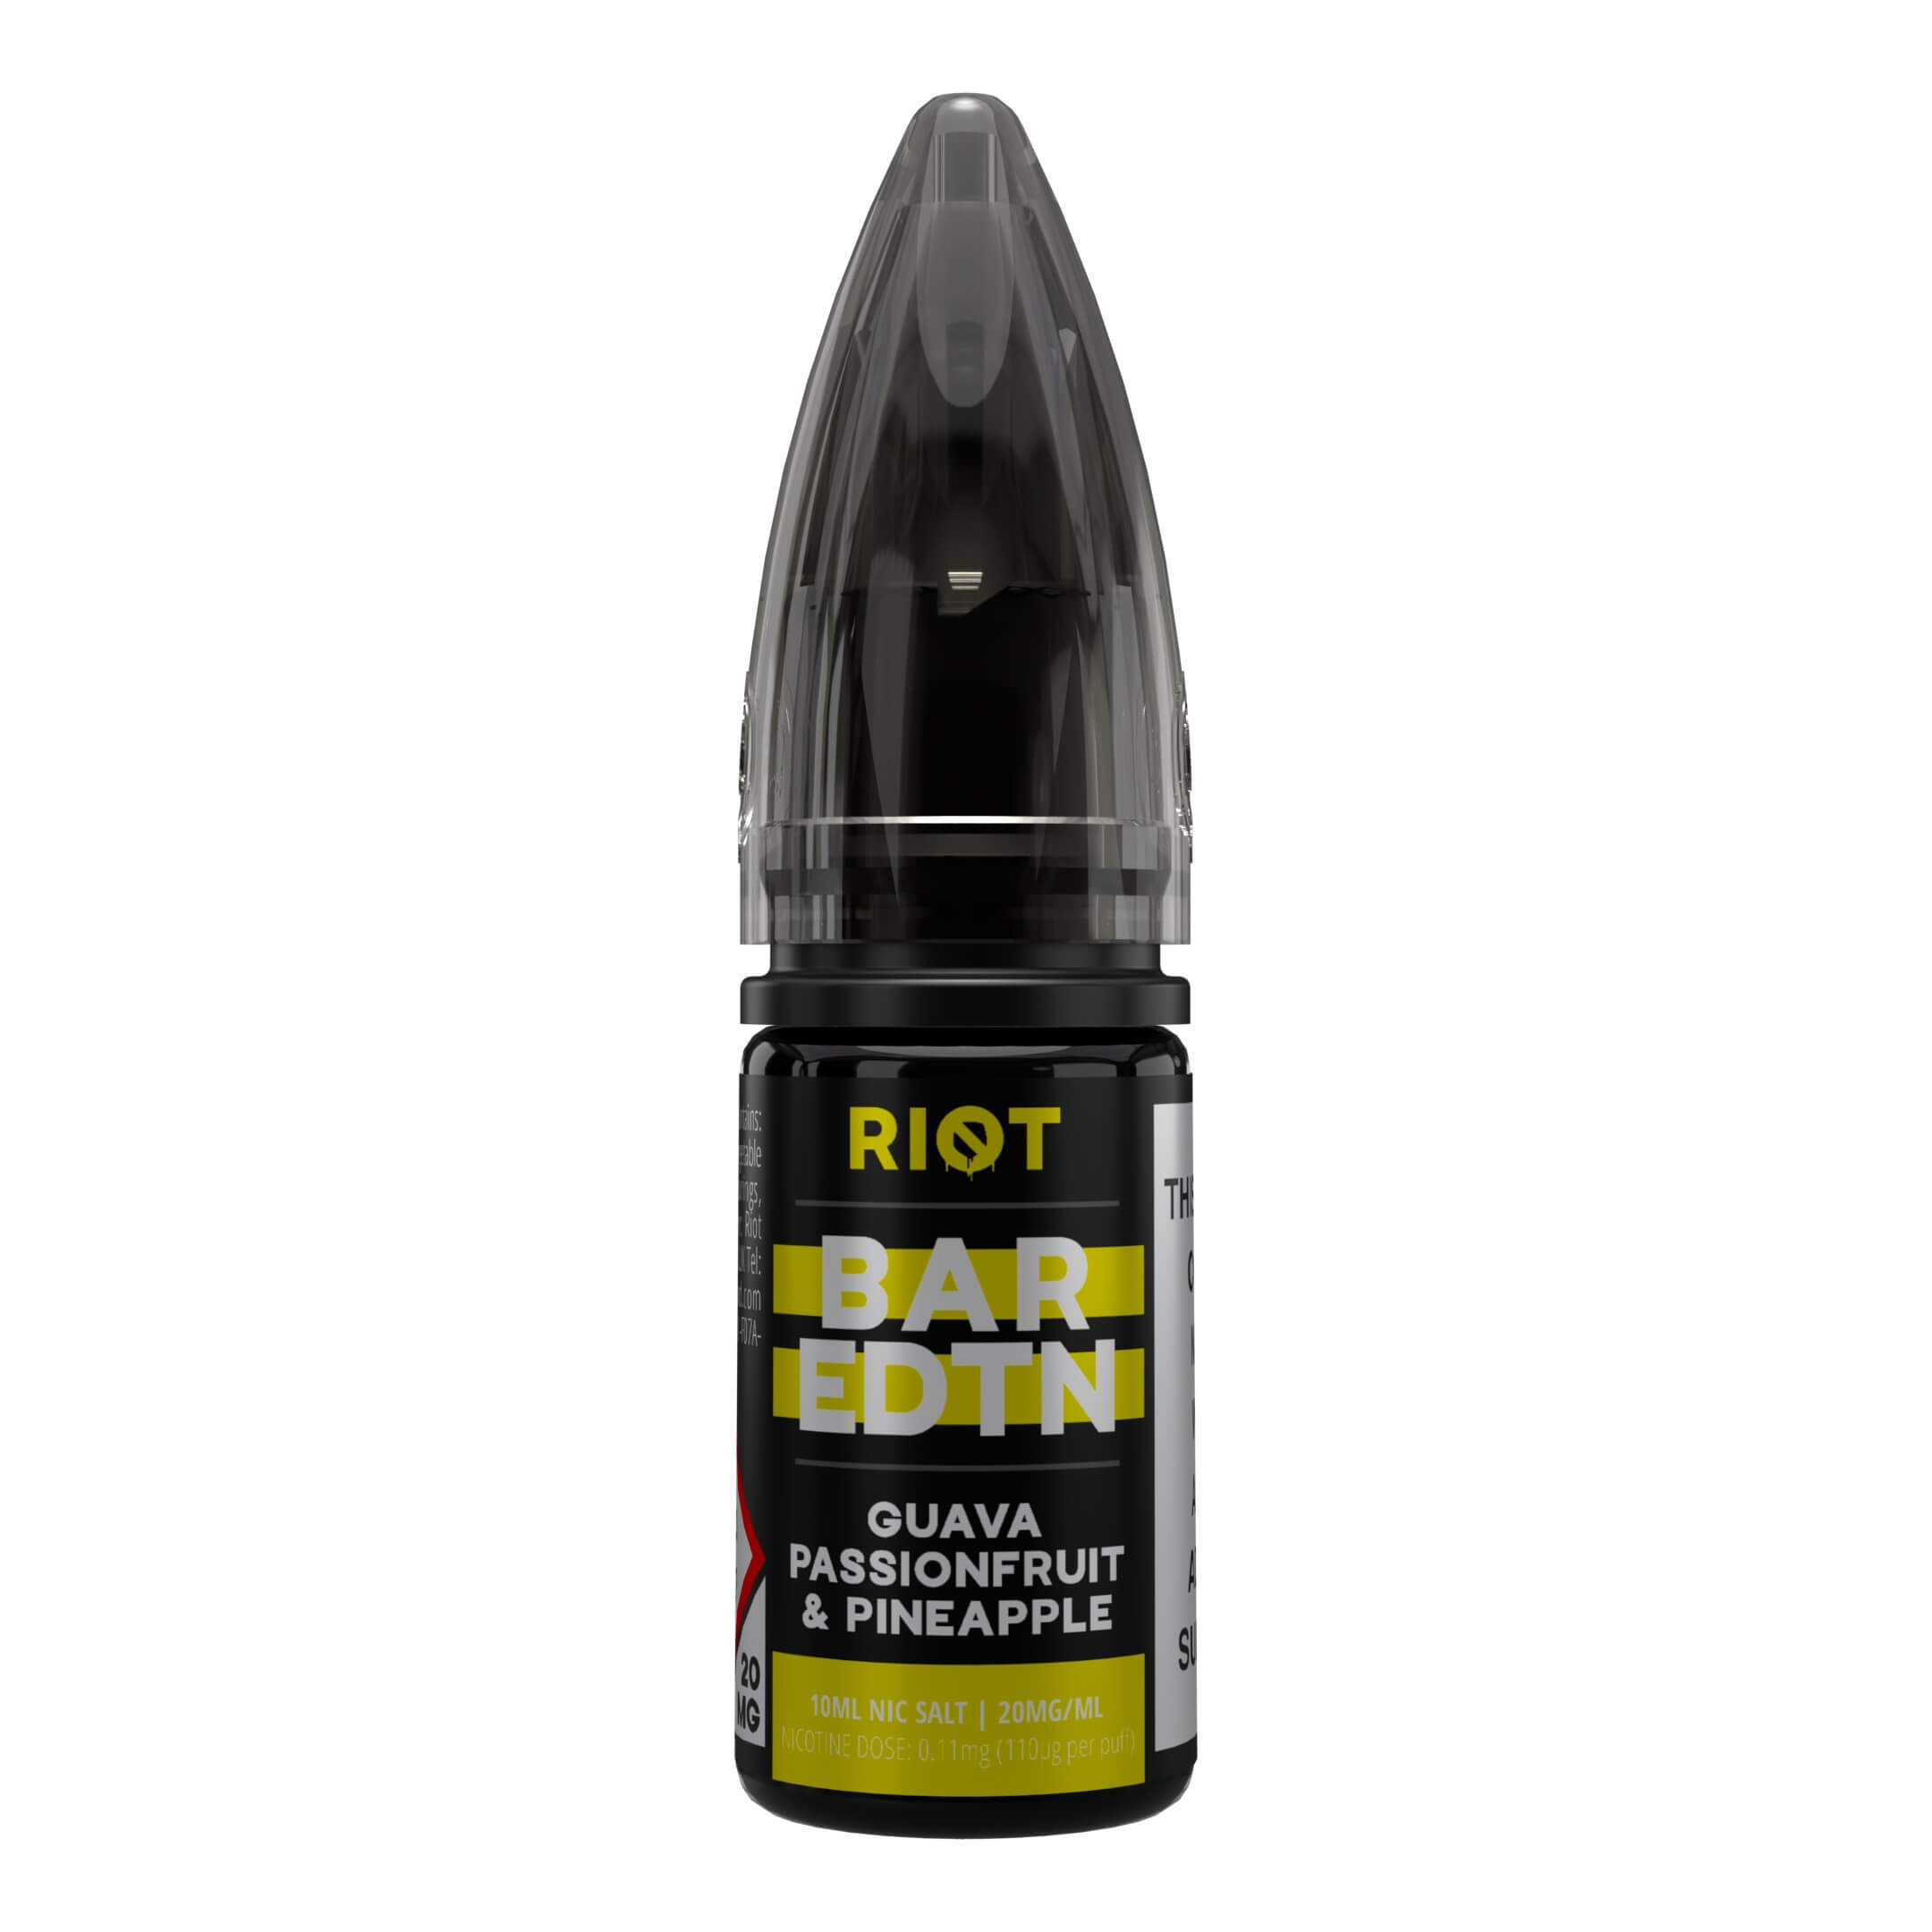 Riot bar edition guava passionfruit & pineapple 10ml nic salts available at dispergo vaping uk